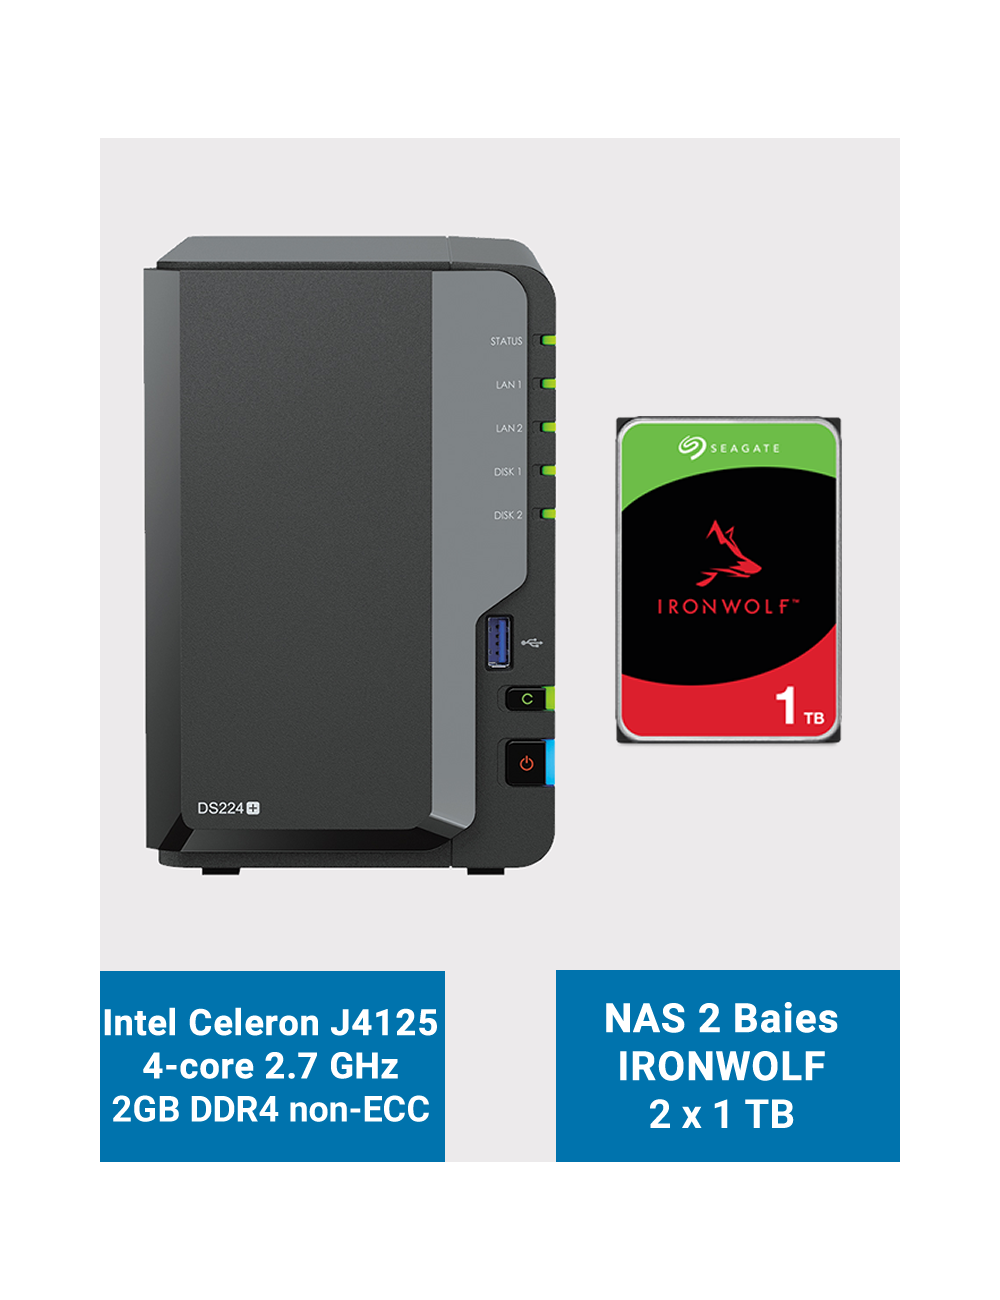 Synology DiskStation DS224+ 2Go Serveur NAS IRONWOLF 2To (2x1To)